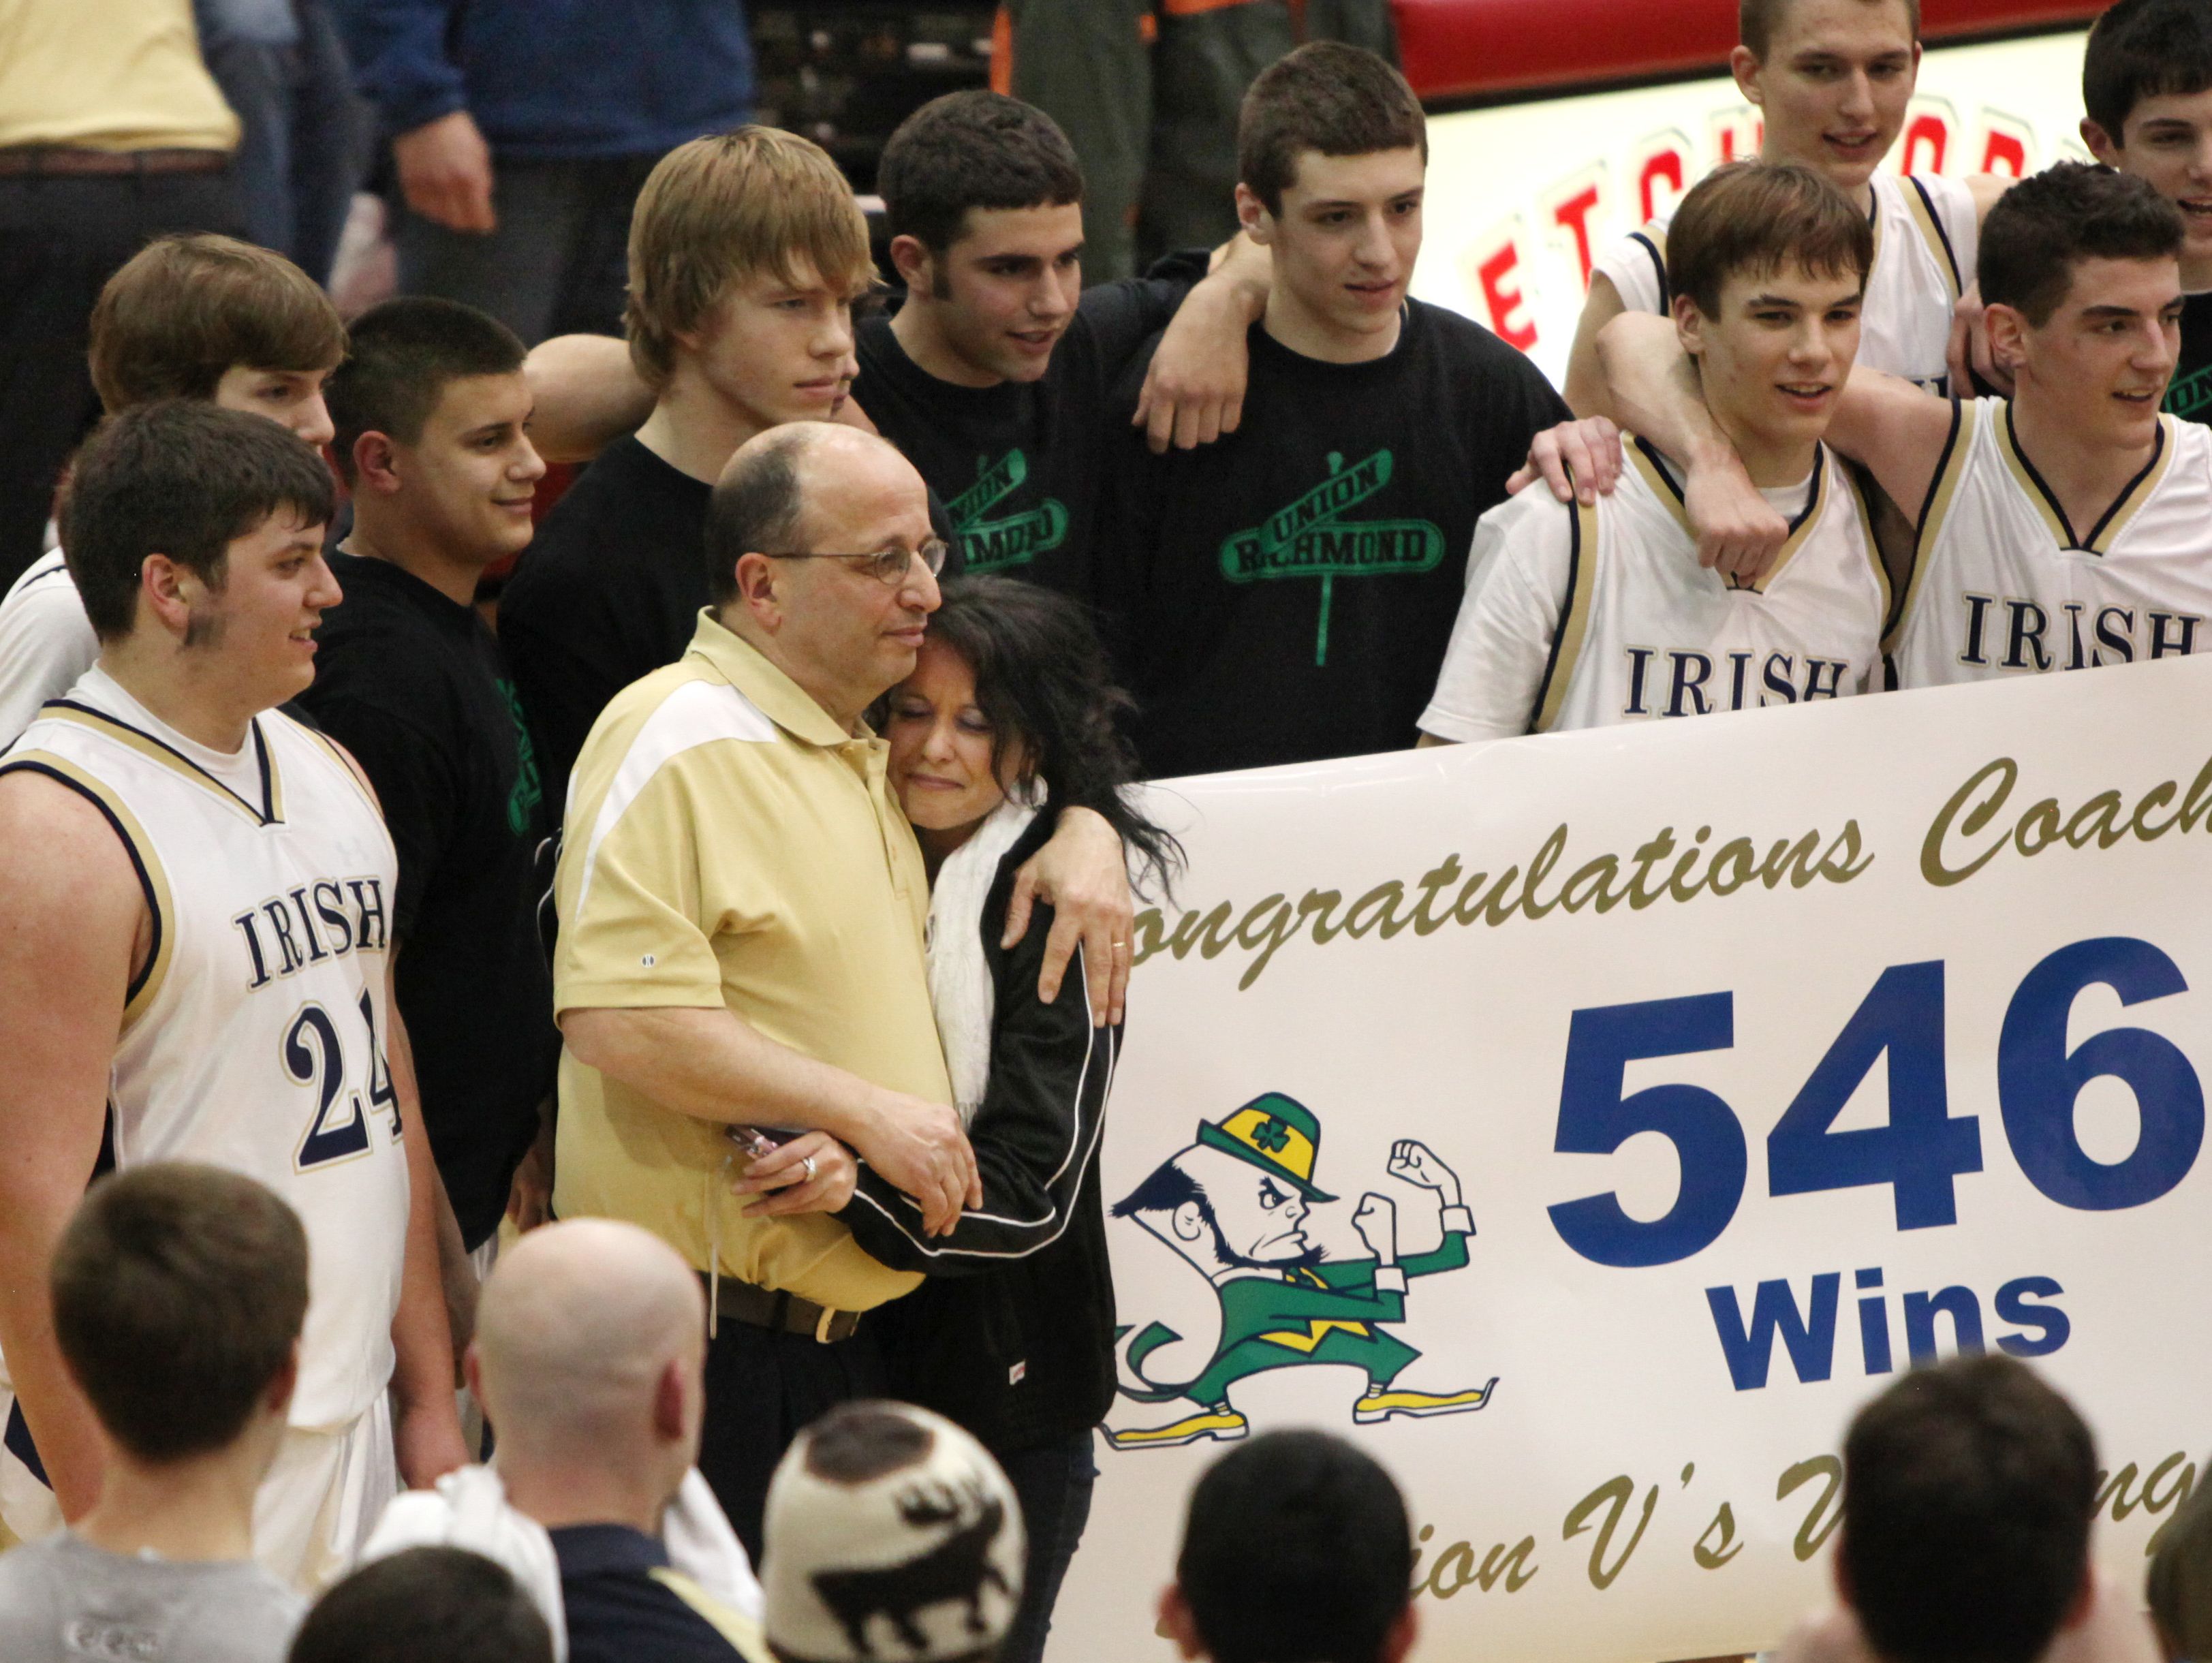 Batavia Notre Dame boys basketball coach Mike Rapone, (left in yellow shirt), is surrounded by family, friends and his players after his team defeated Arkport in their 2010 Section V Class D1 semifinal. He became the winningest coach in Section V boys basketball history on March 3 of that year.